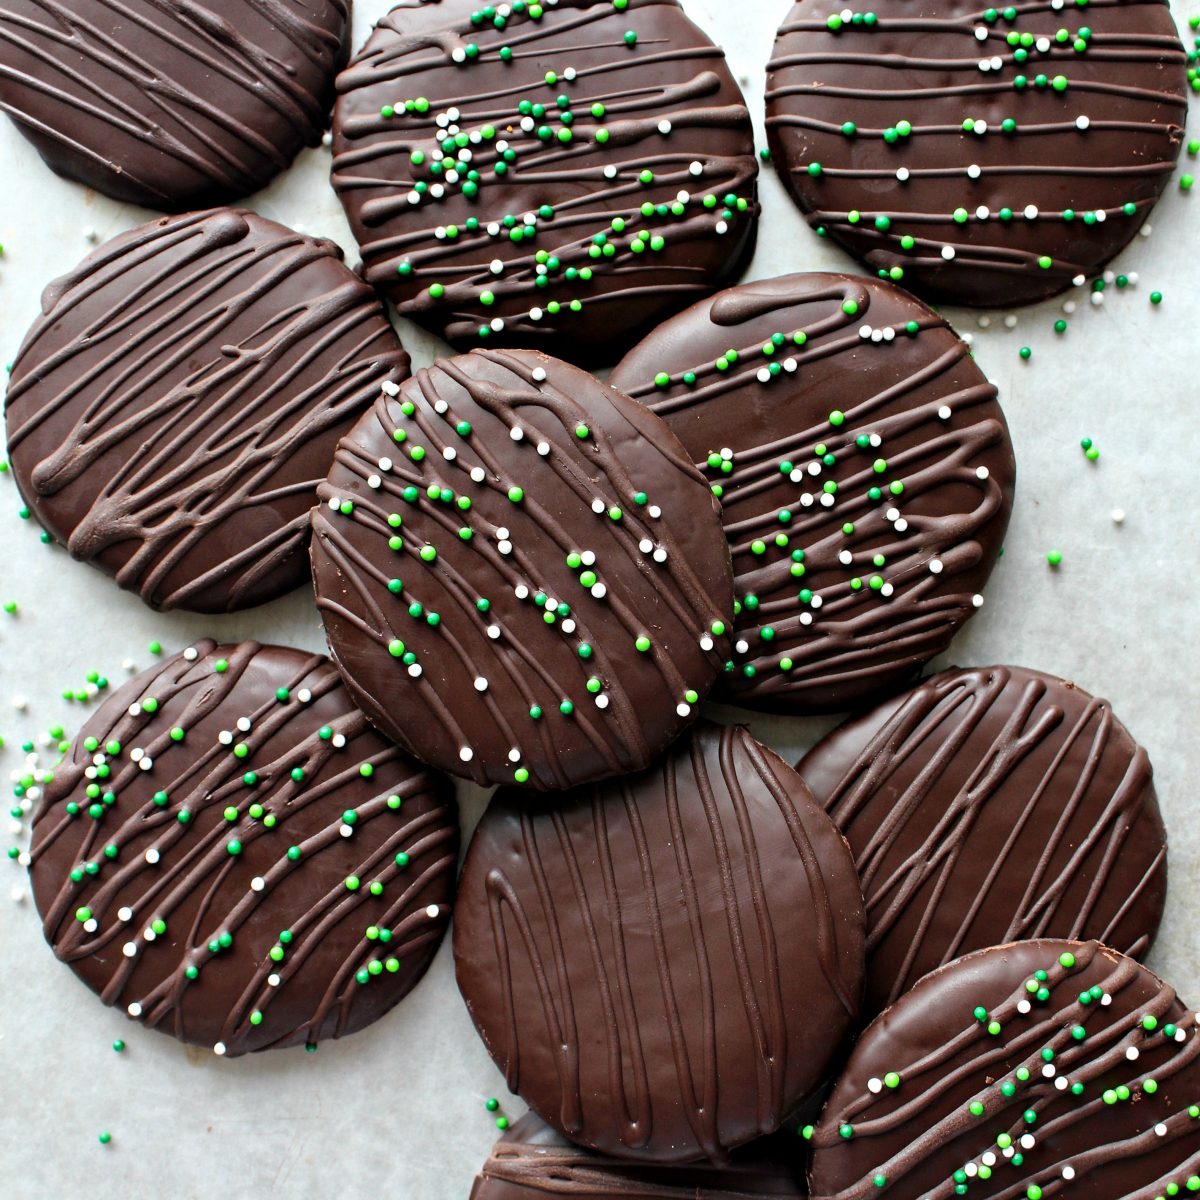 Closeup of chocolate covered cookies decorated with chocolate drizzle and sprinkles.